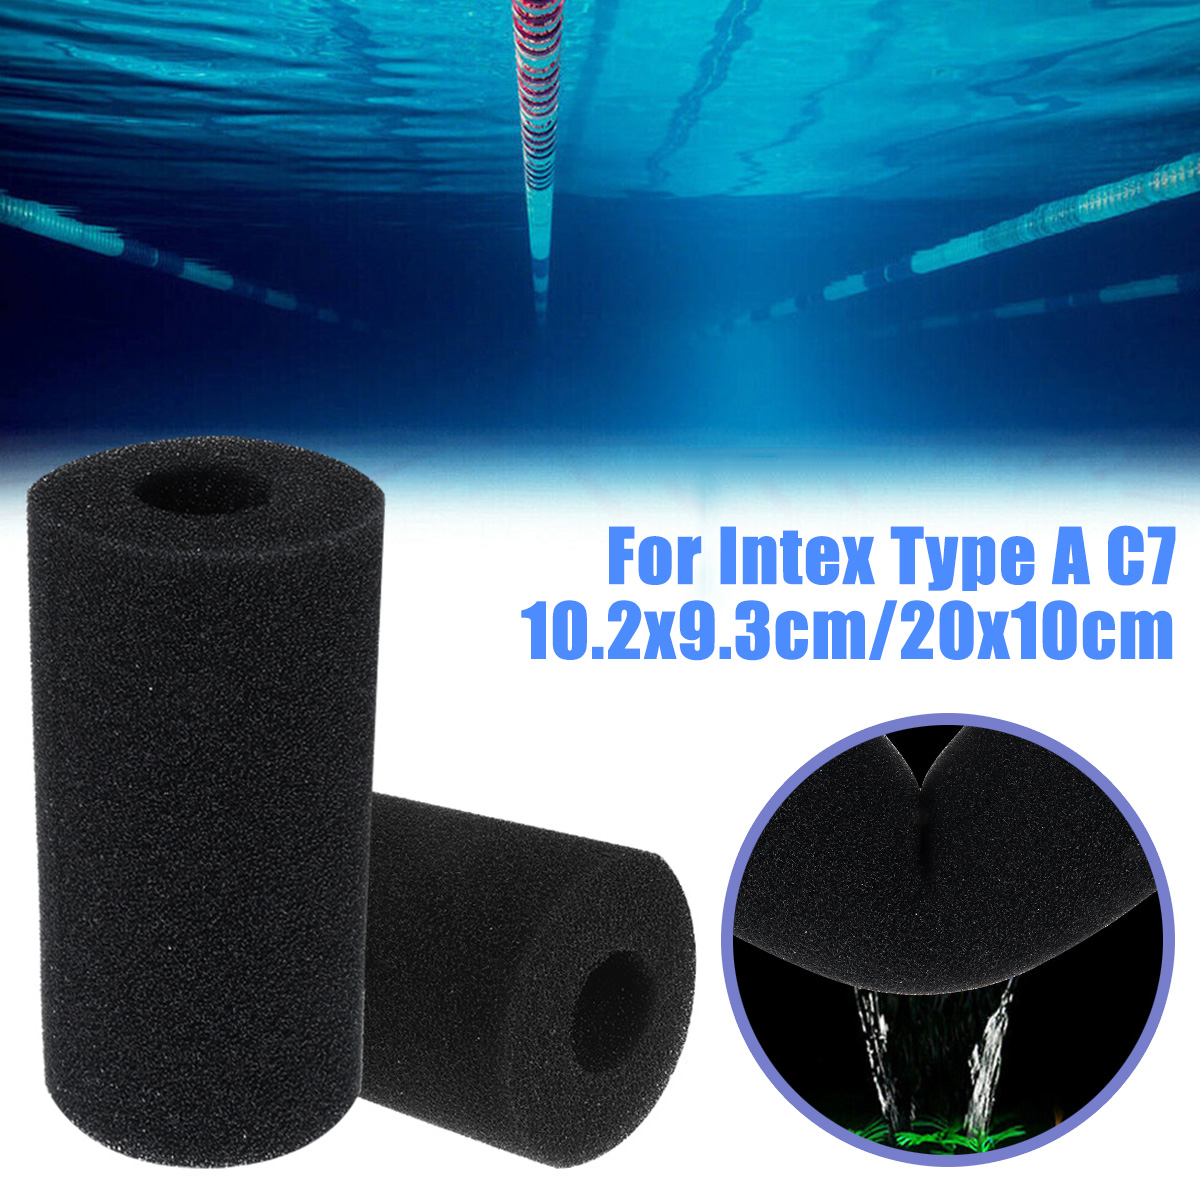 Swimming-Pool-Cleaning-Sponge-Column-Suitable-for-Intex-Type-A-C7-1934963-3